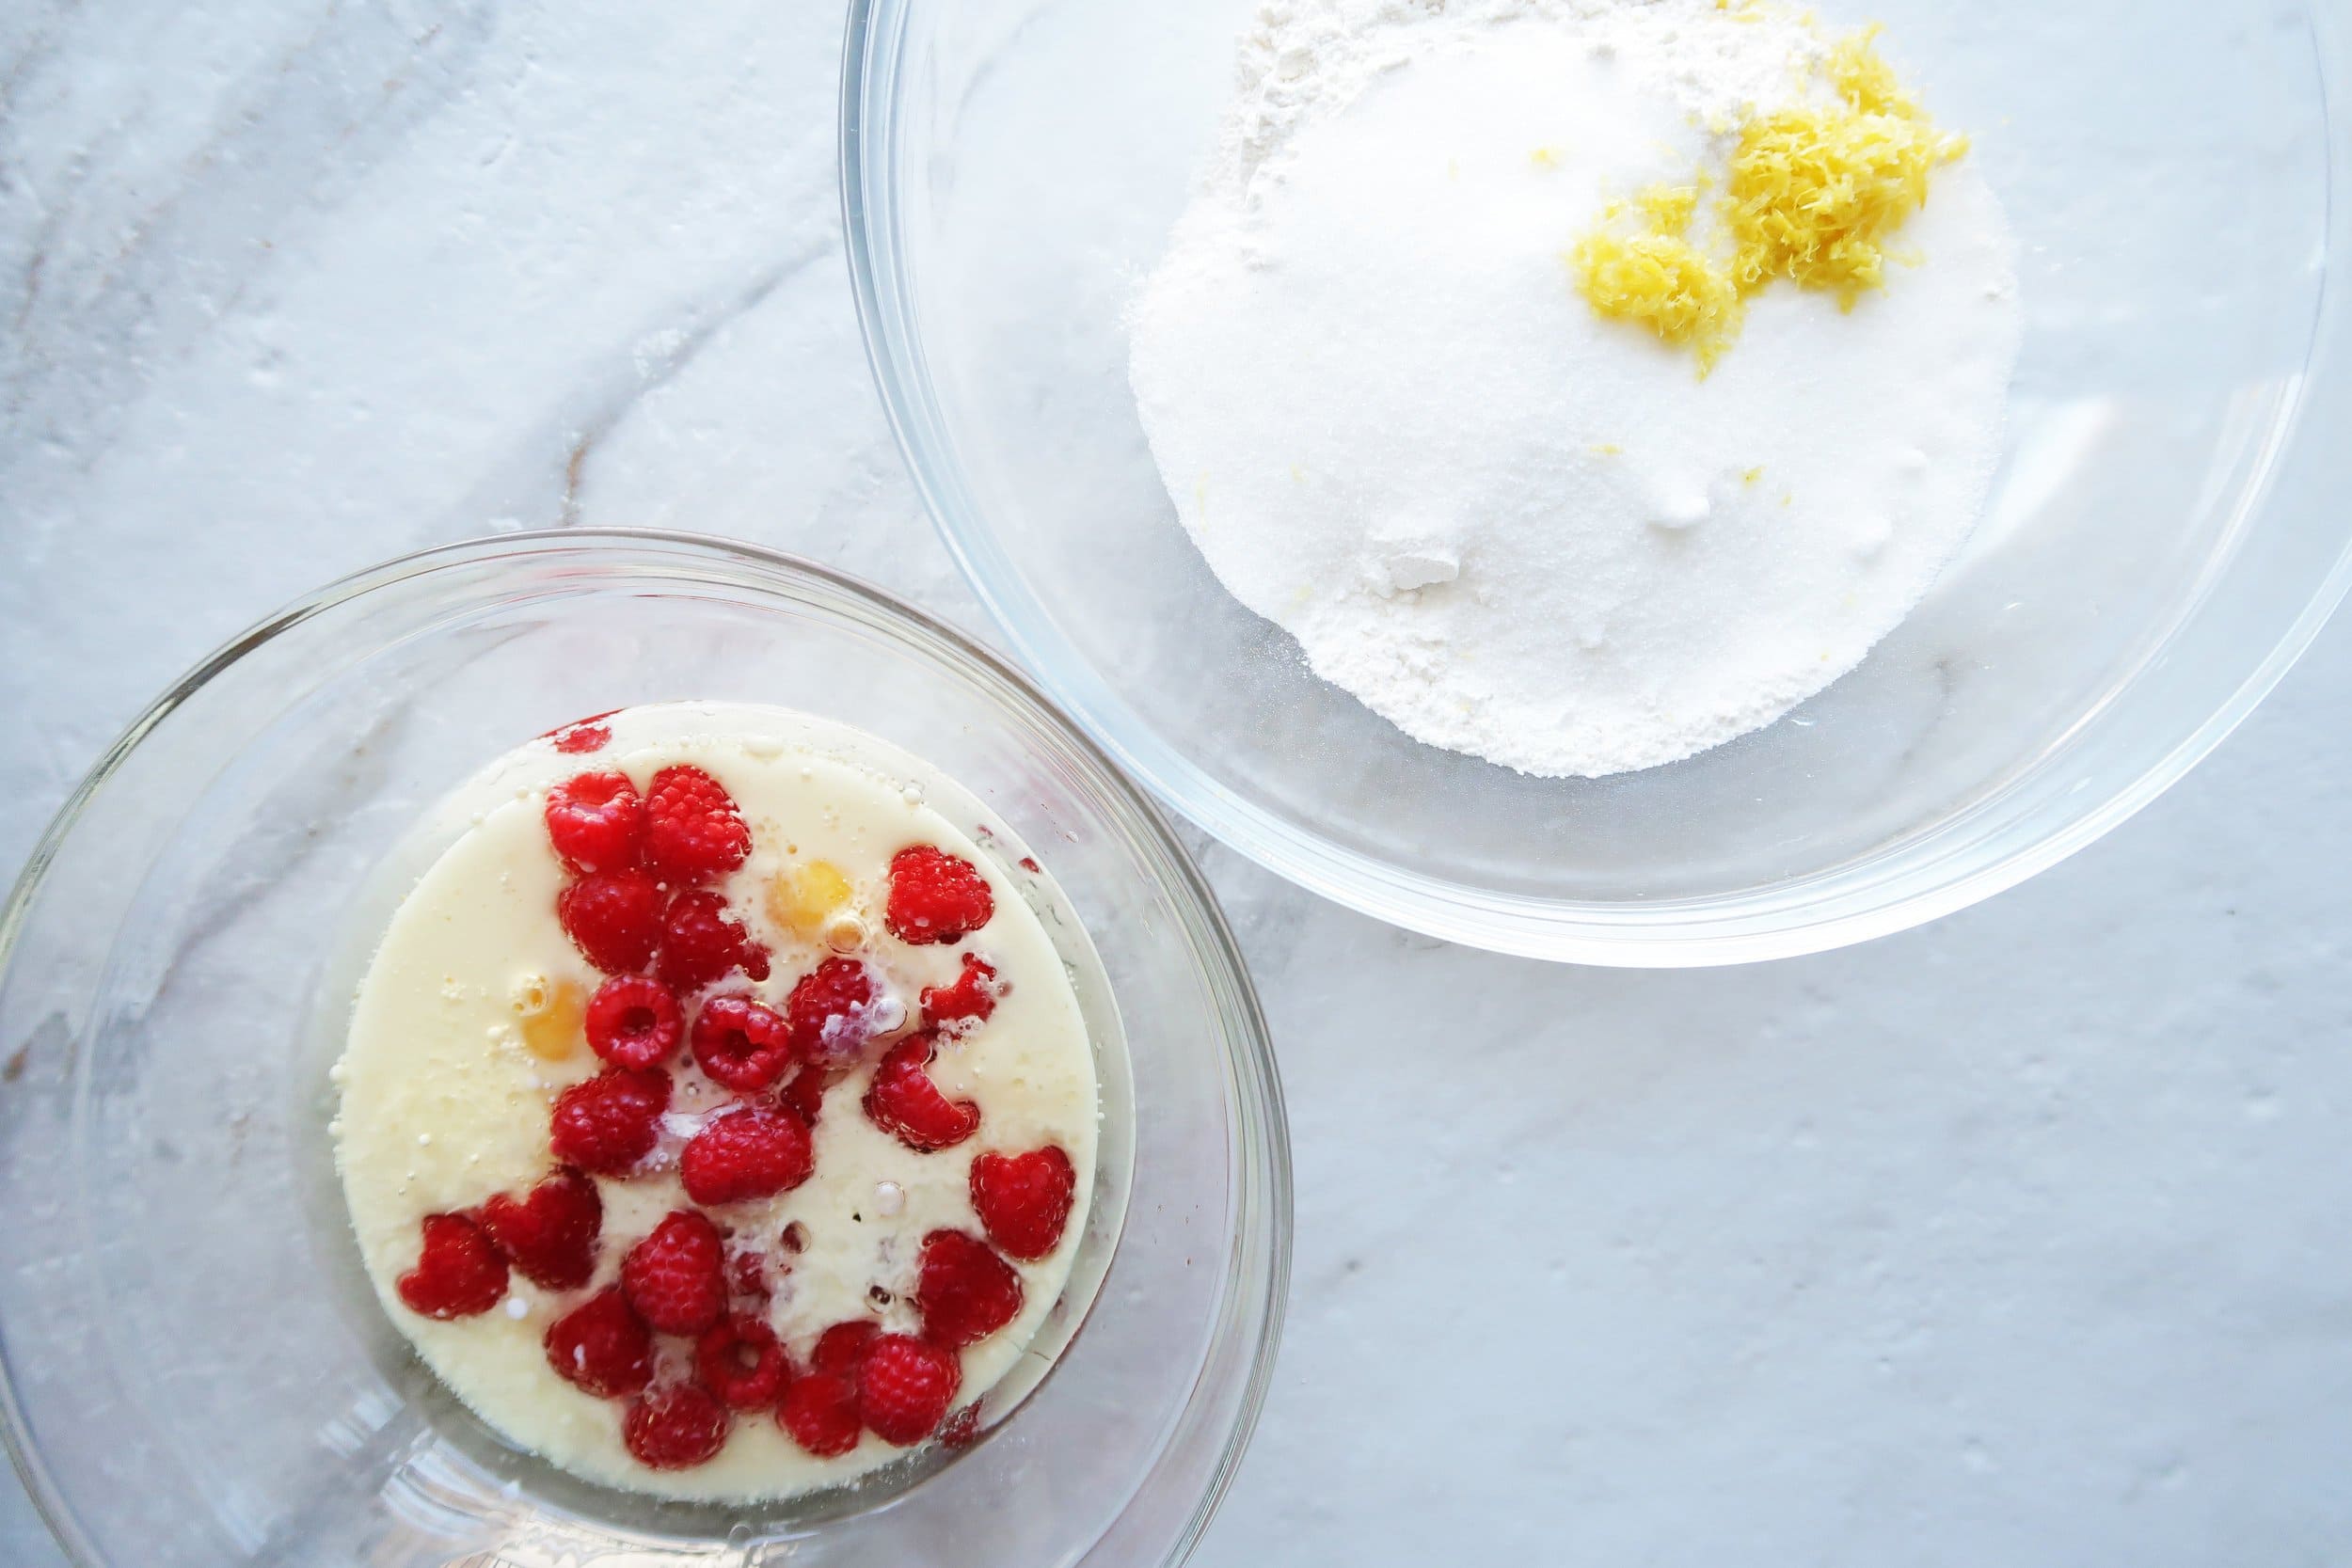 Bowls of dry and wet ingredients featuring whole raspberries.